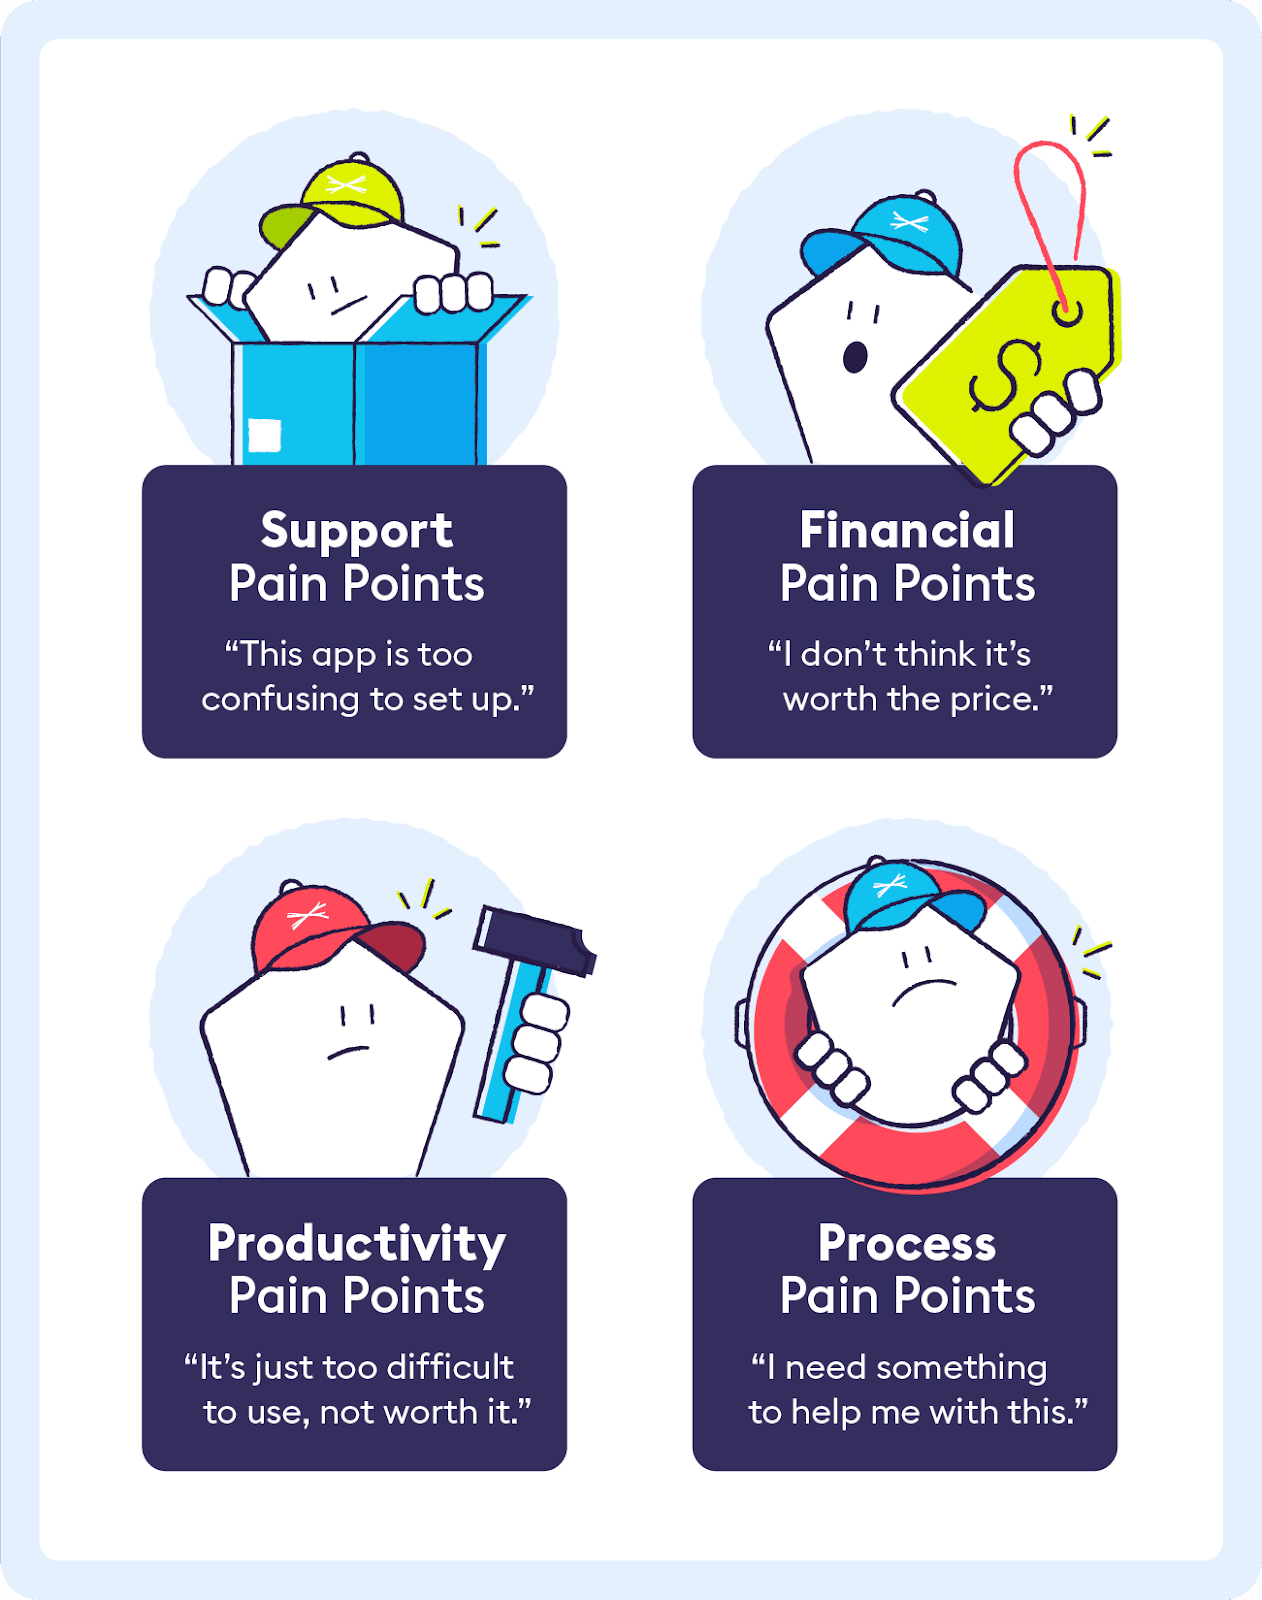 The four types of pain points; support, financial, productivity, and process.